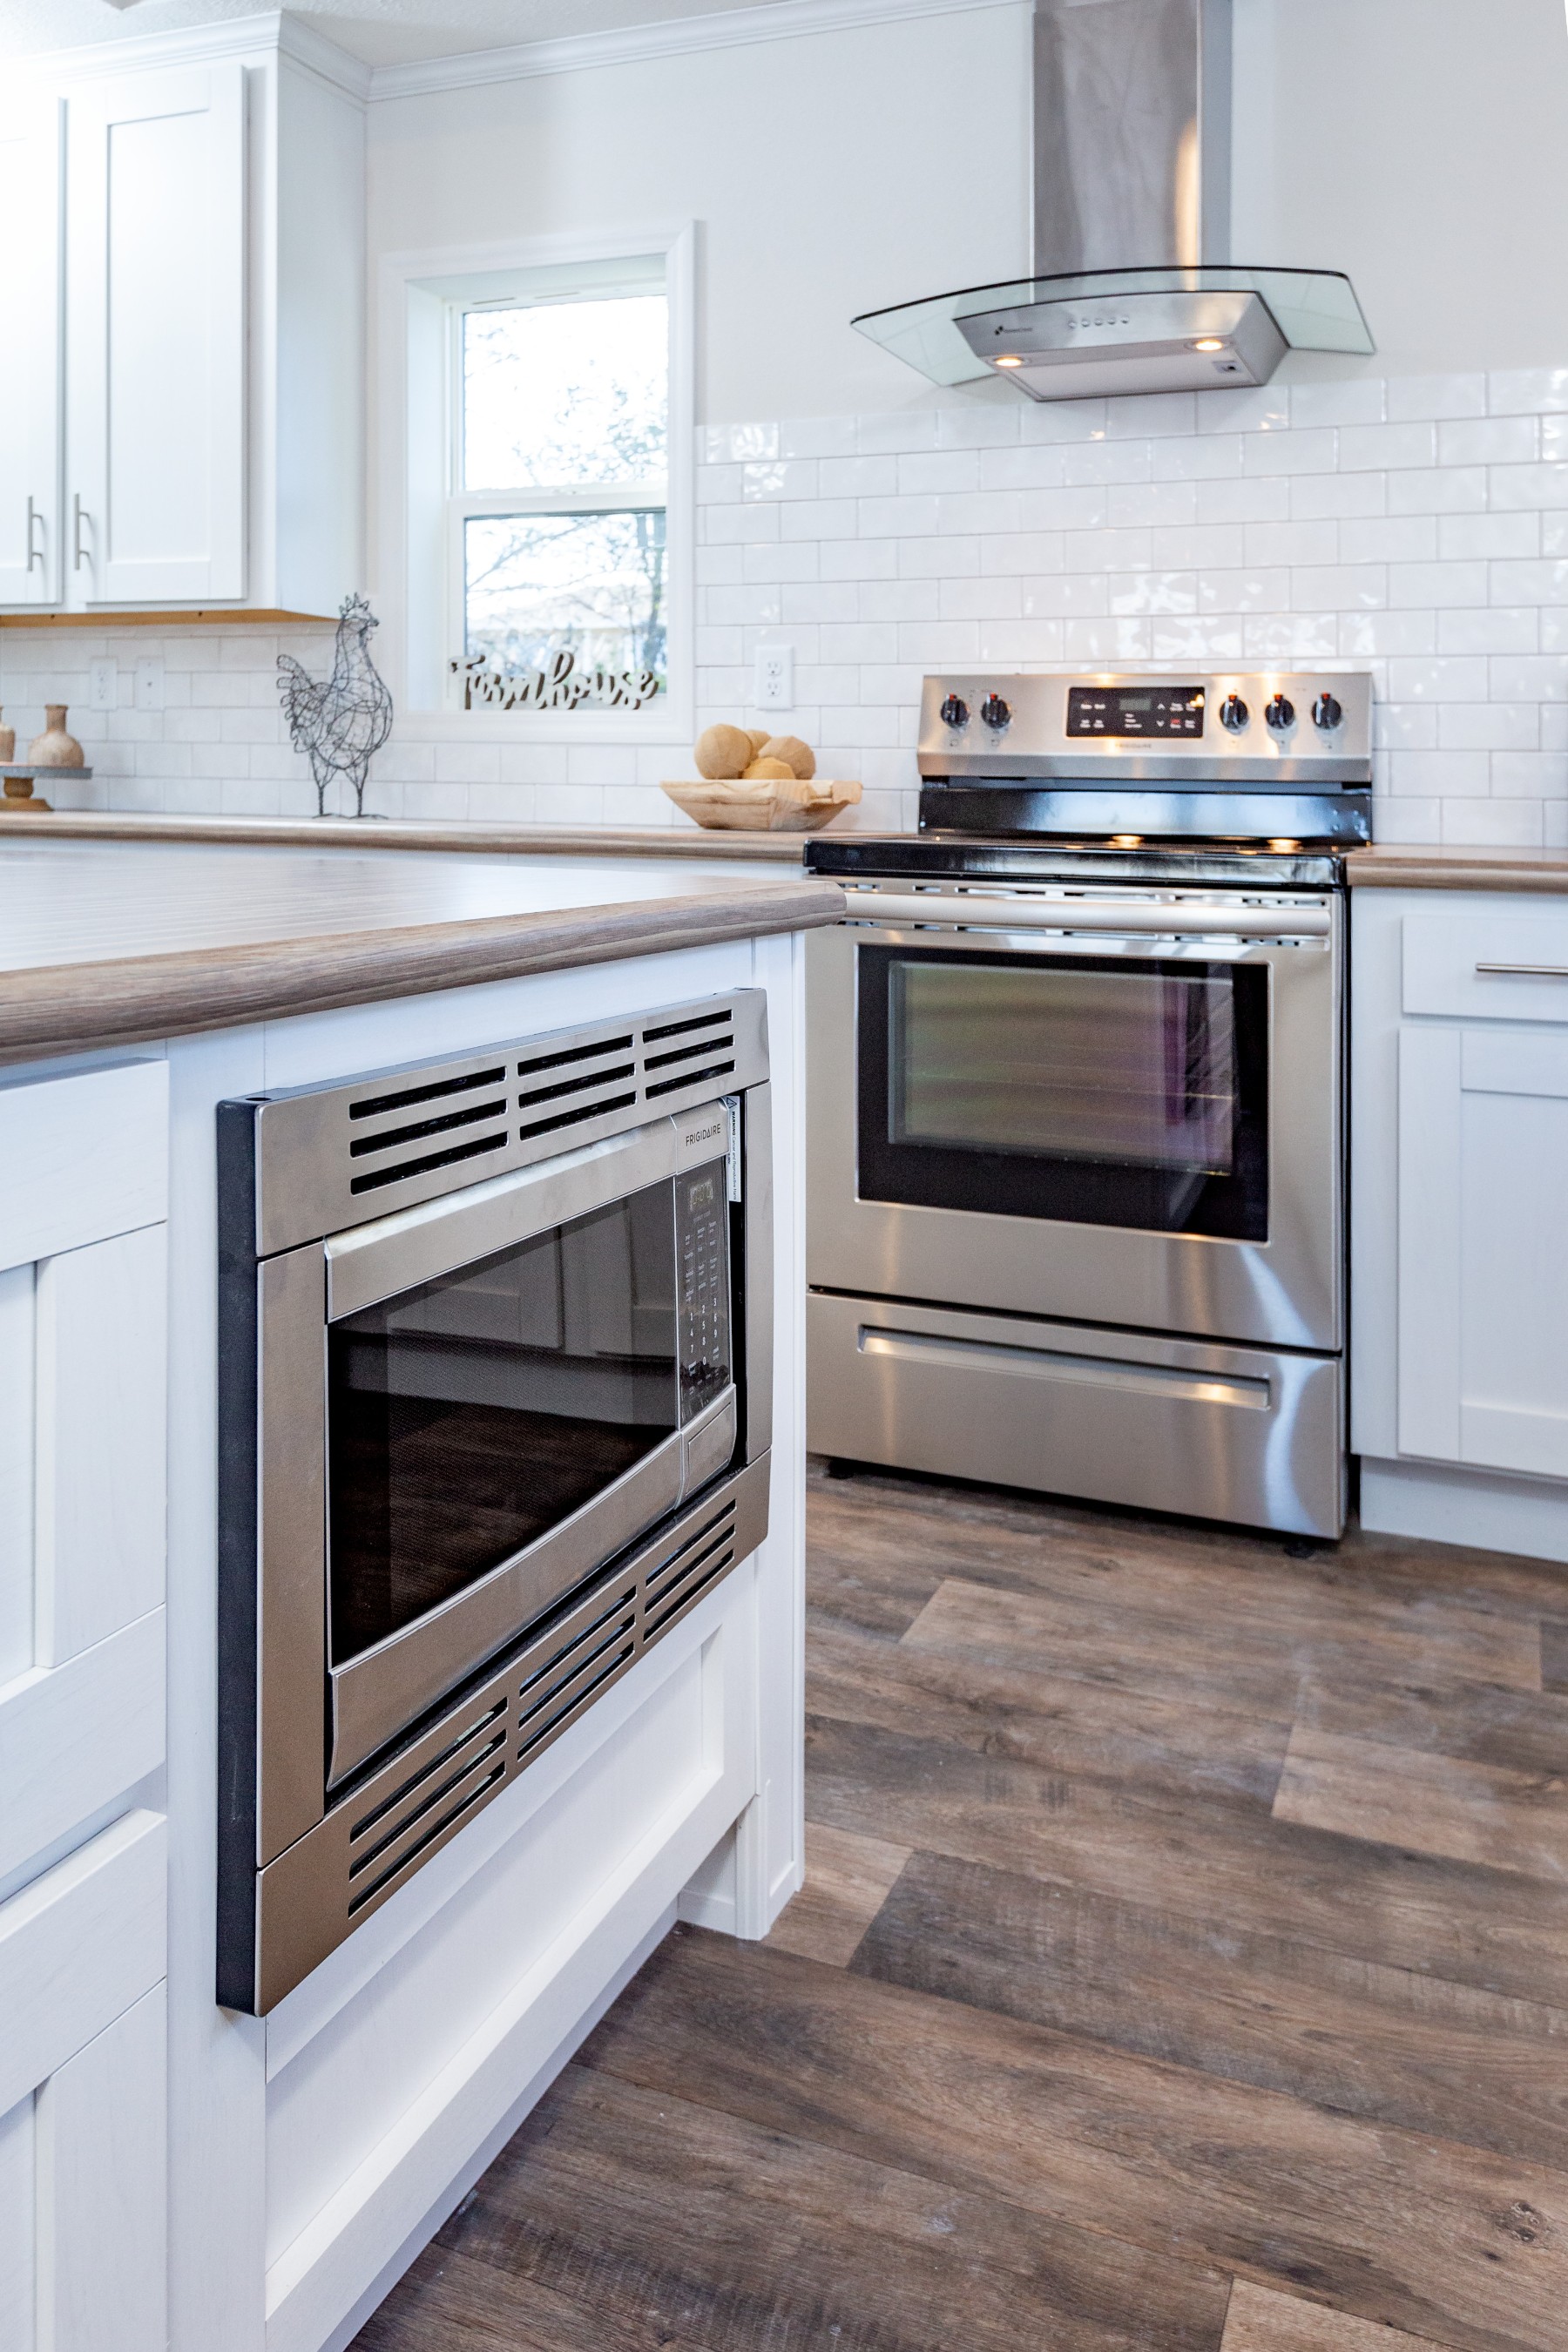 Frigidaire® offers modern, family-friendly designs purposefully crafted with time-saving solutions, like premium fingerprint-resistant Smudge-Proof® finishes.